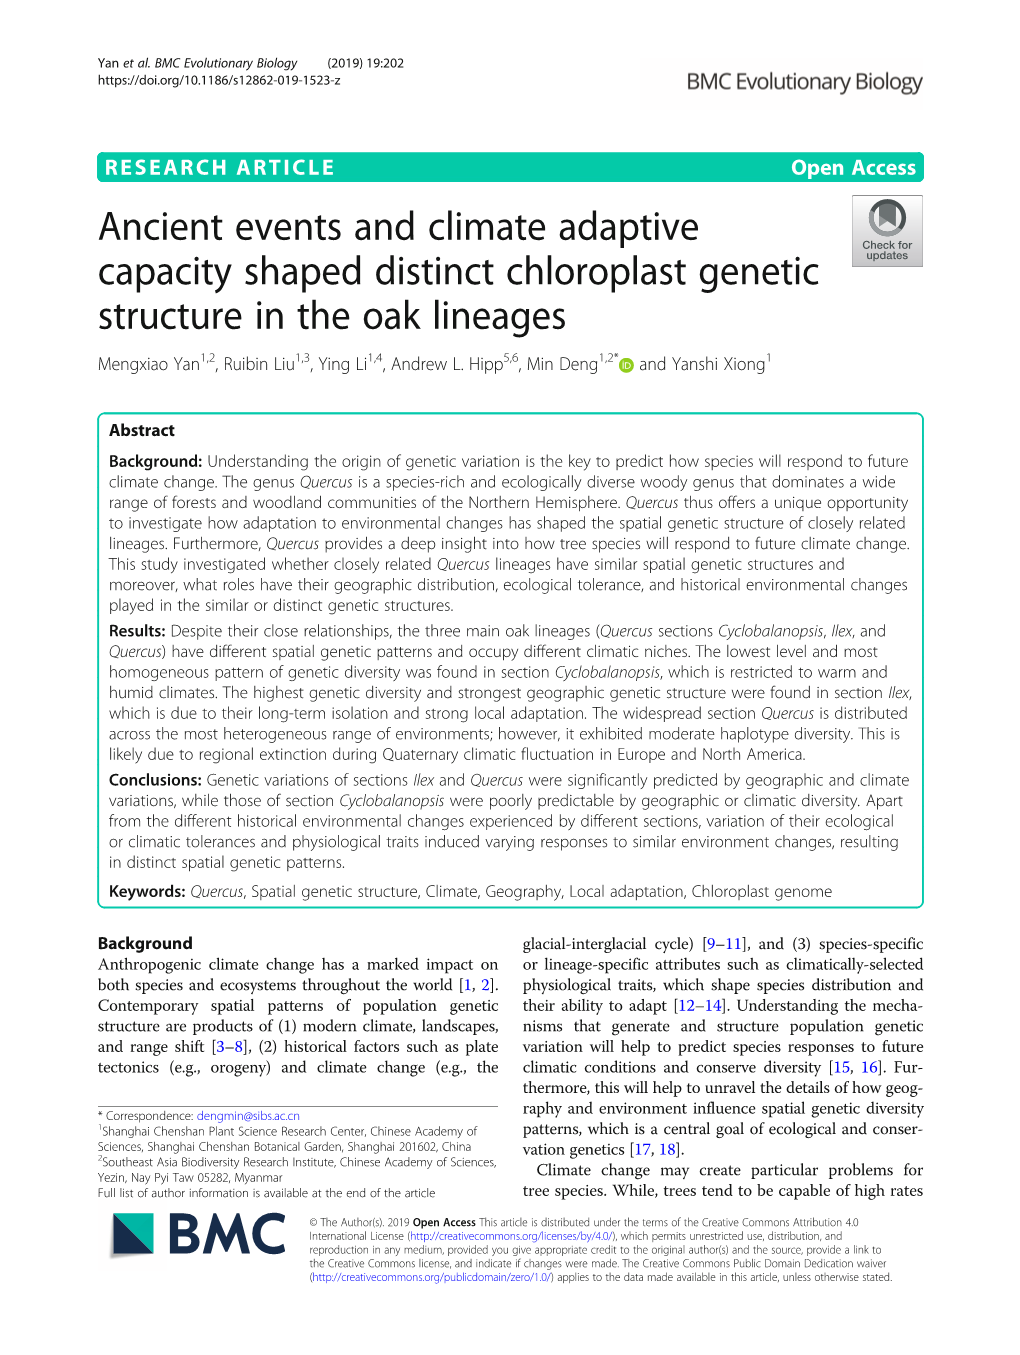 Ancient Events and Climate Adaptive Capacity Shaped Distinct Chloroplast Genetic Structure in the Oak Lineages Mengxiao Yan1,2, Ruibin Liu1,3, Ying Li1,4, Andrew L